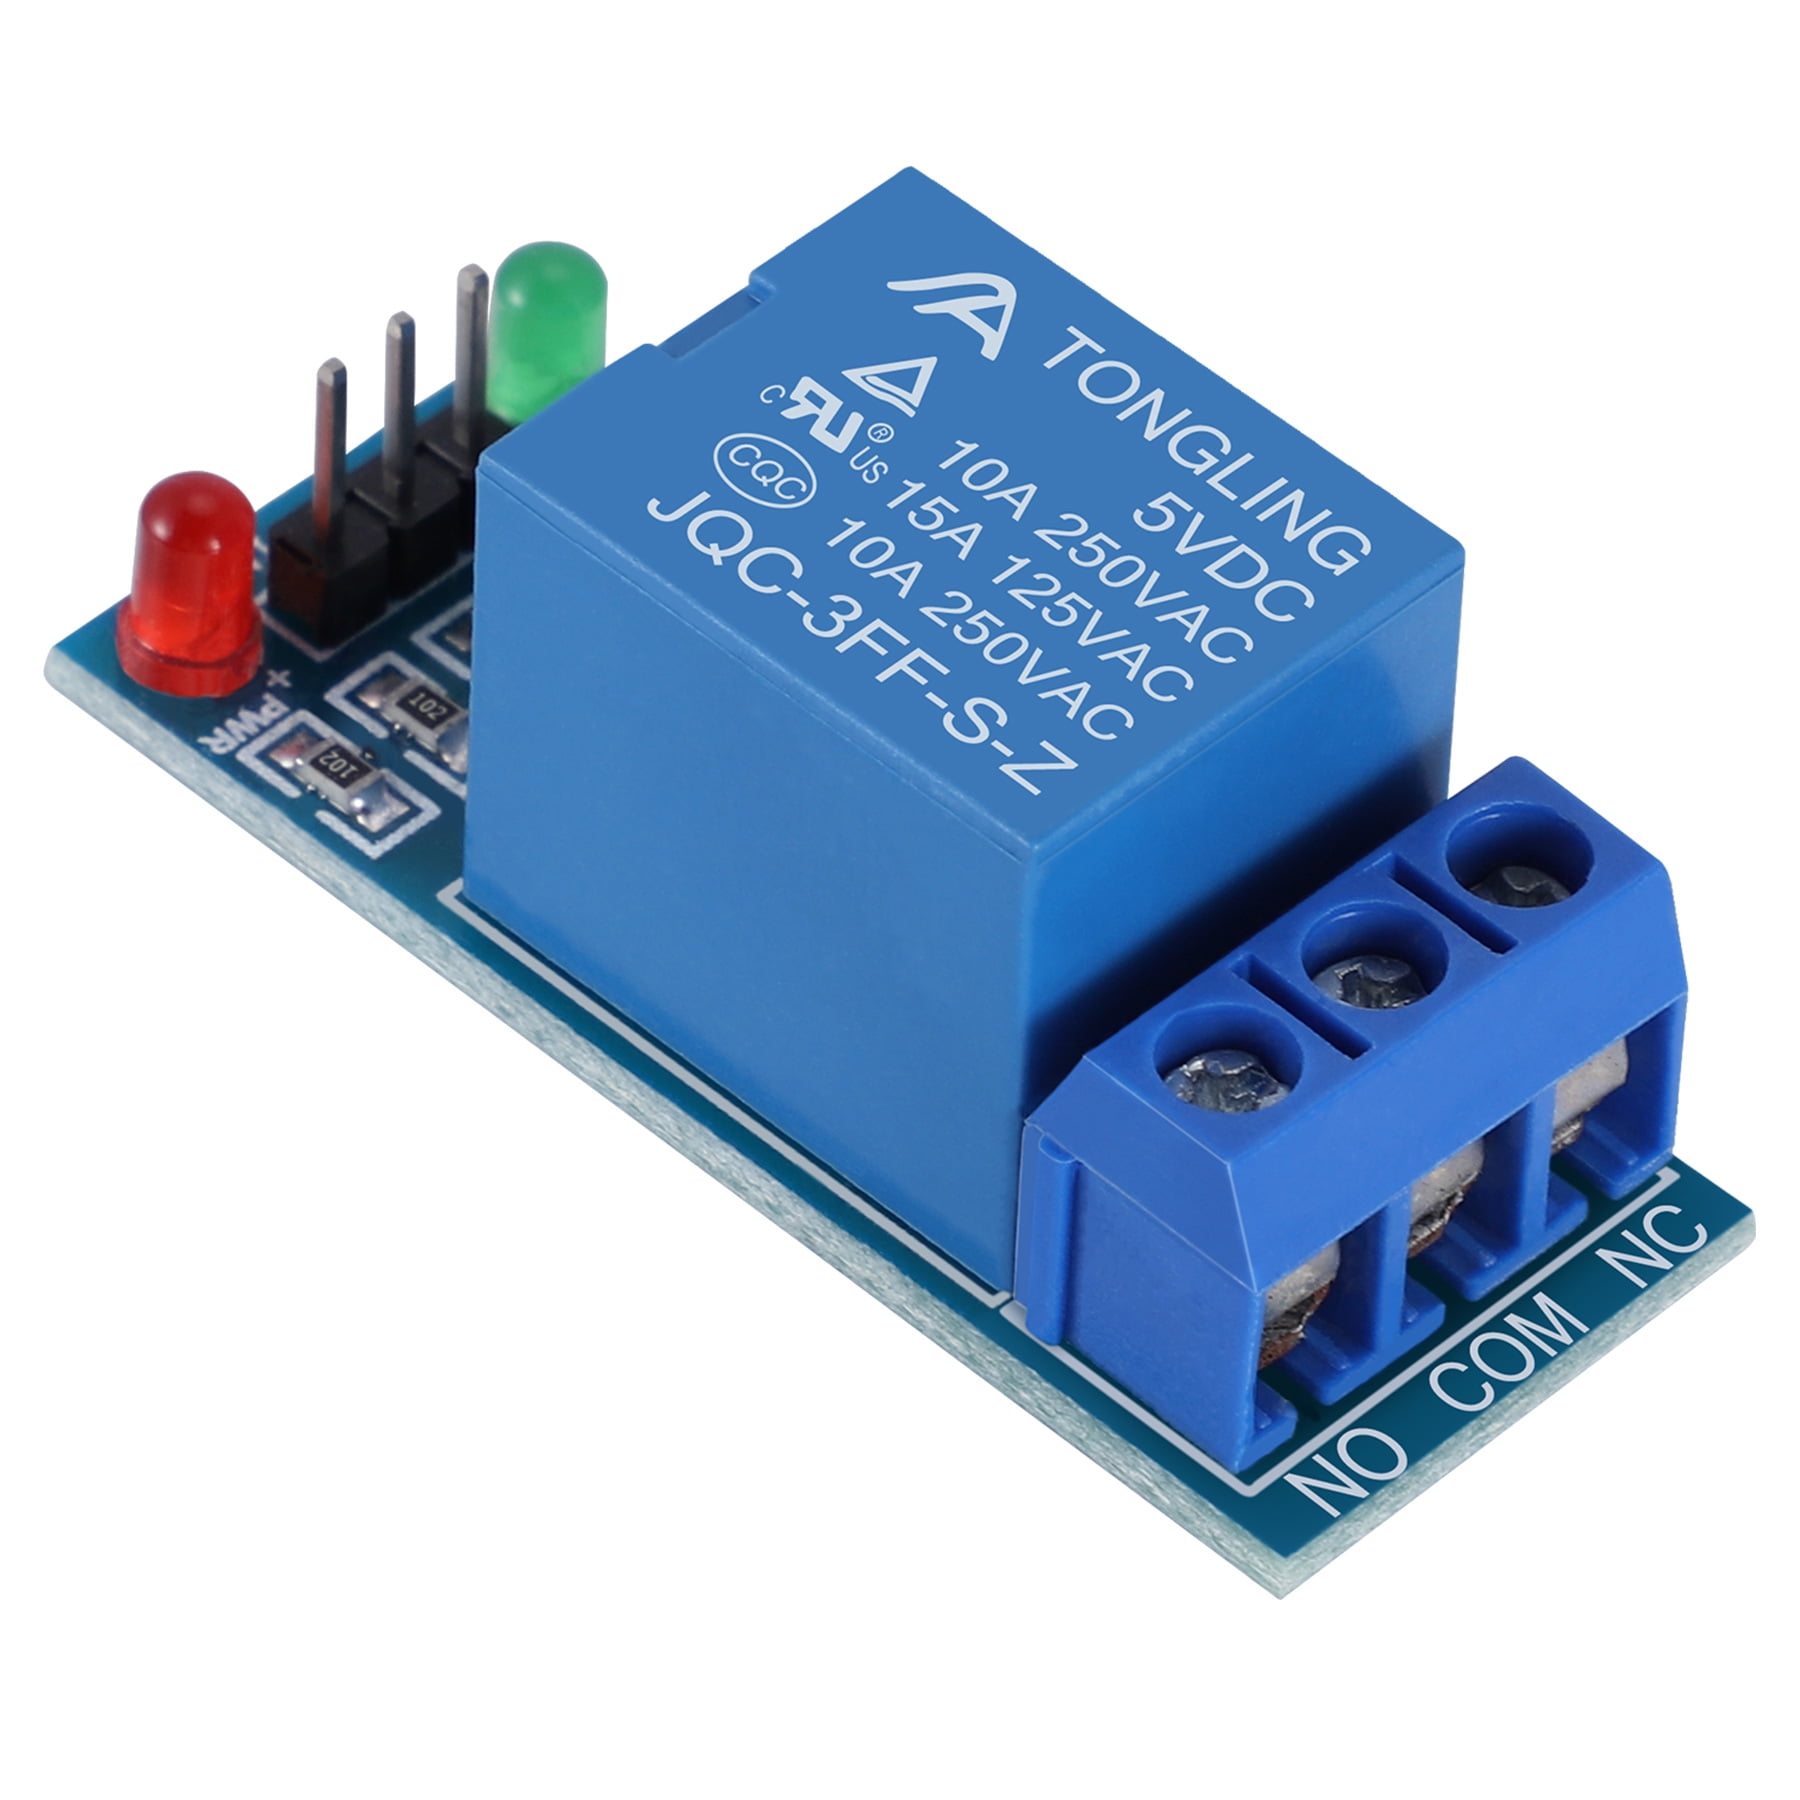 1 2 4 8 16 Channel Relay Module 5V Optocoupler LED for Arduino PiC ARM AVR 